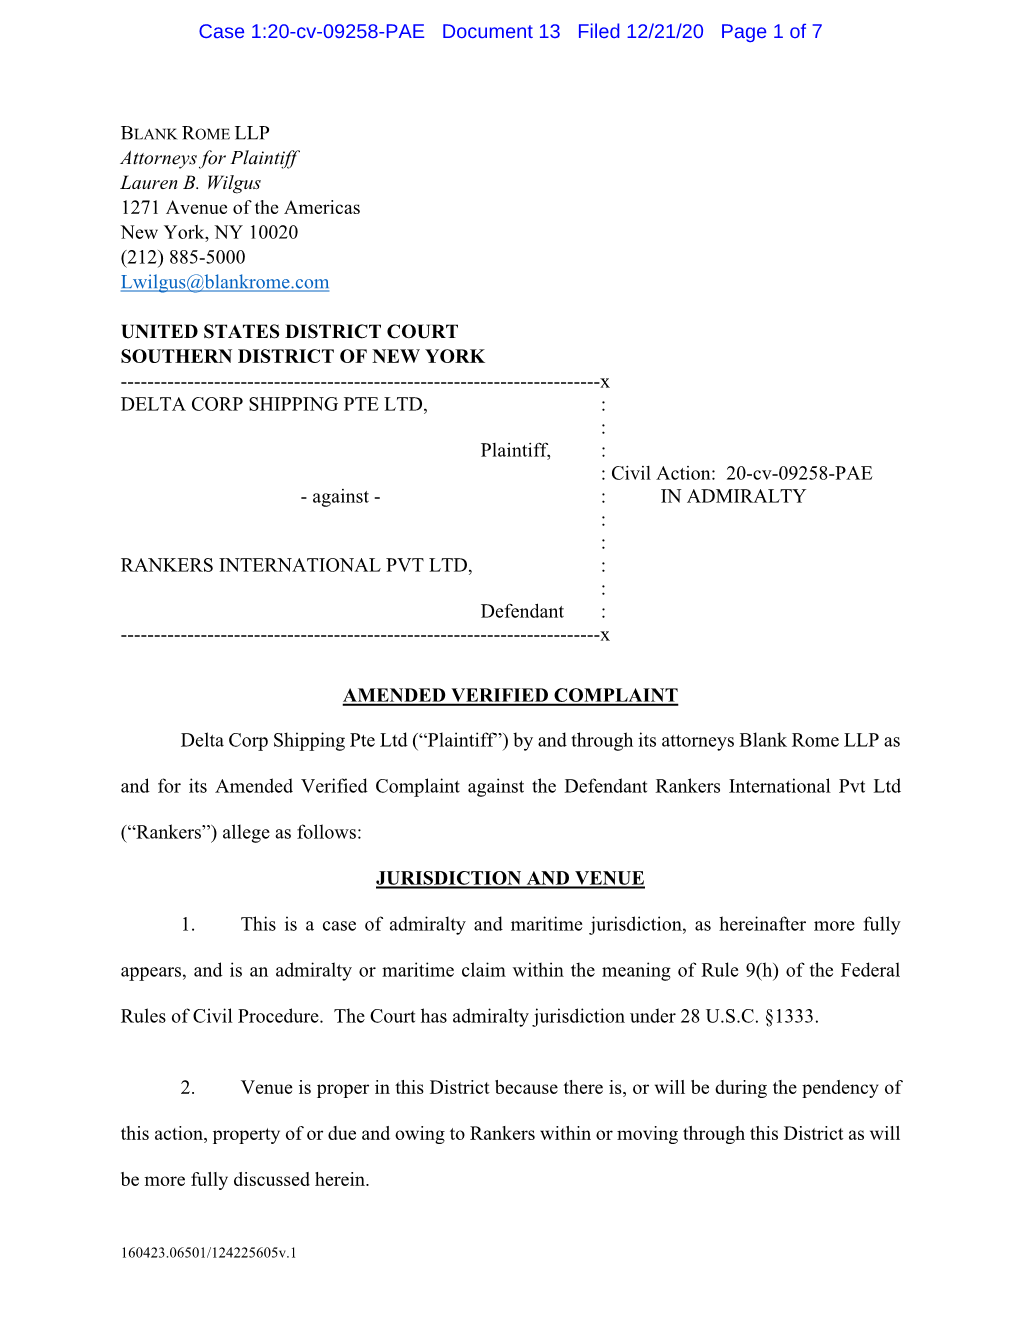 12/21/2020 Amended Complaint